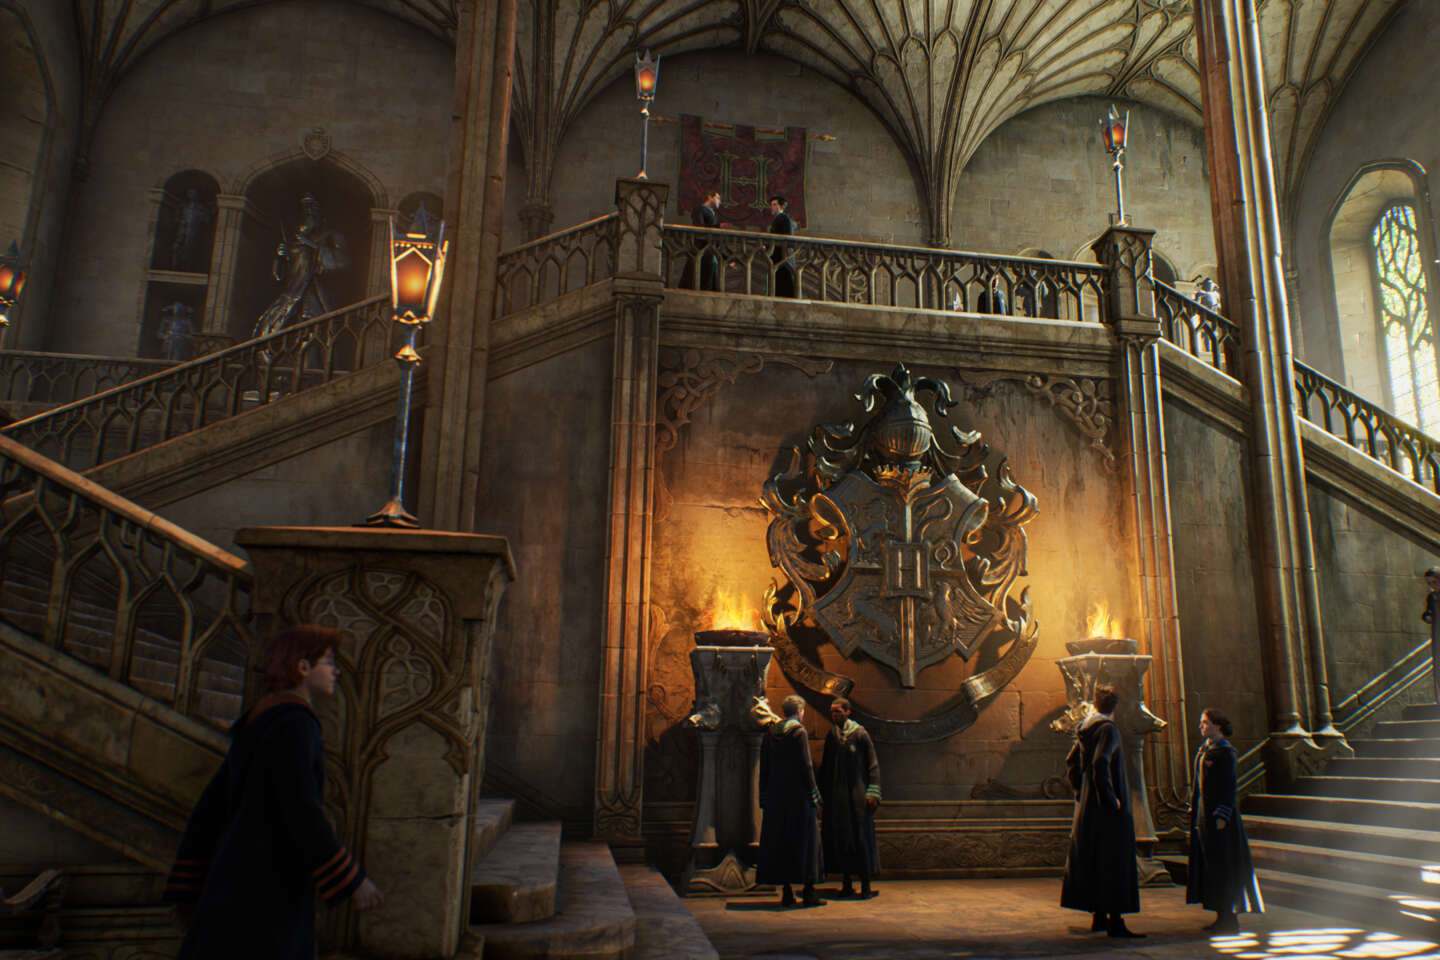 Hogwarts Legacy' release brings more transphobia to Harry Potter franchise